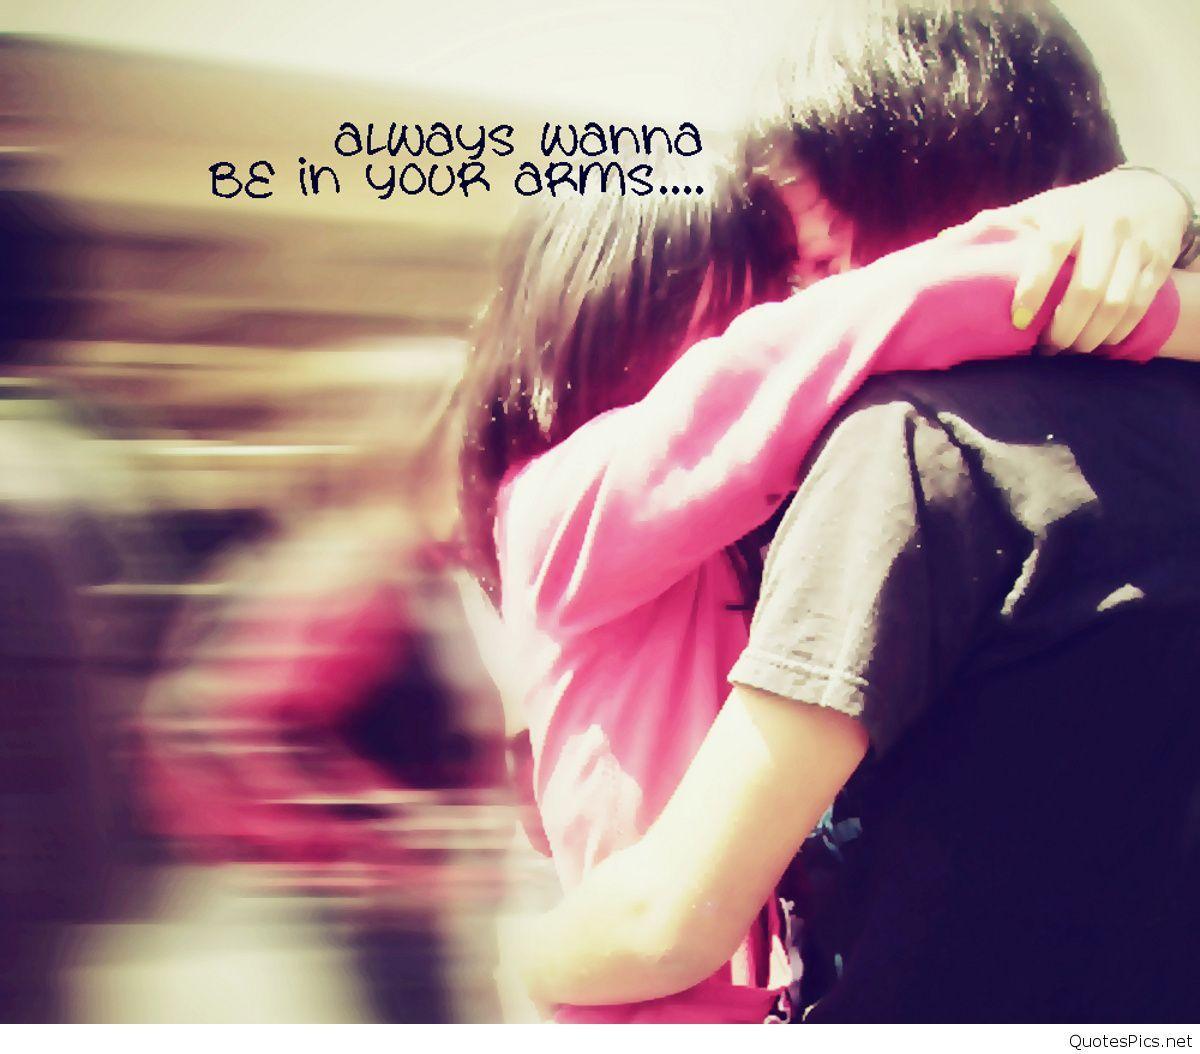 Cute amazing love couple wallpaper quotes & sayings